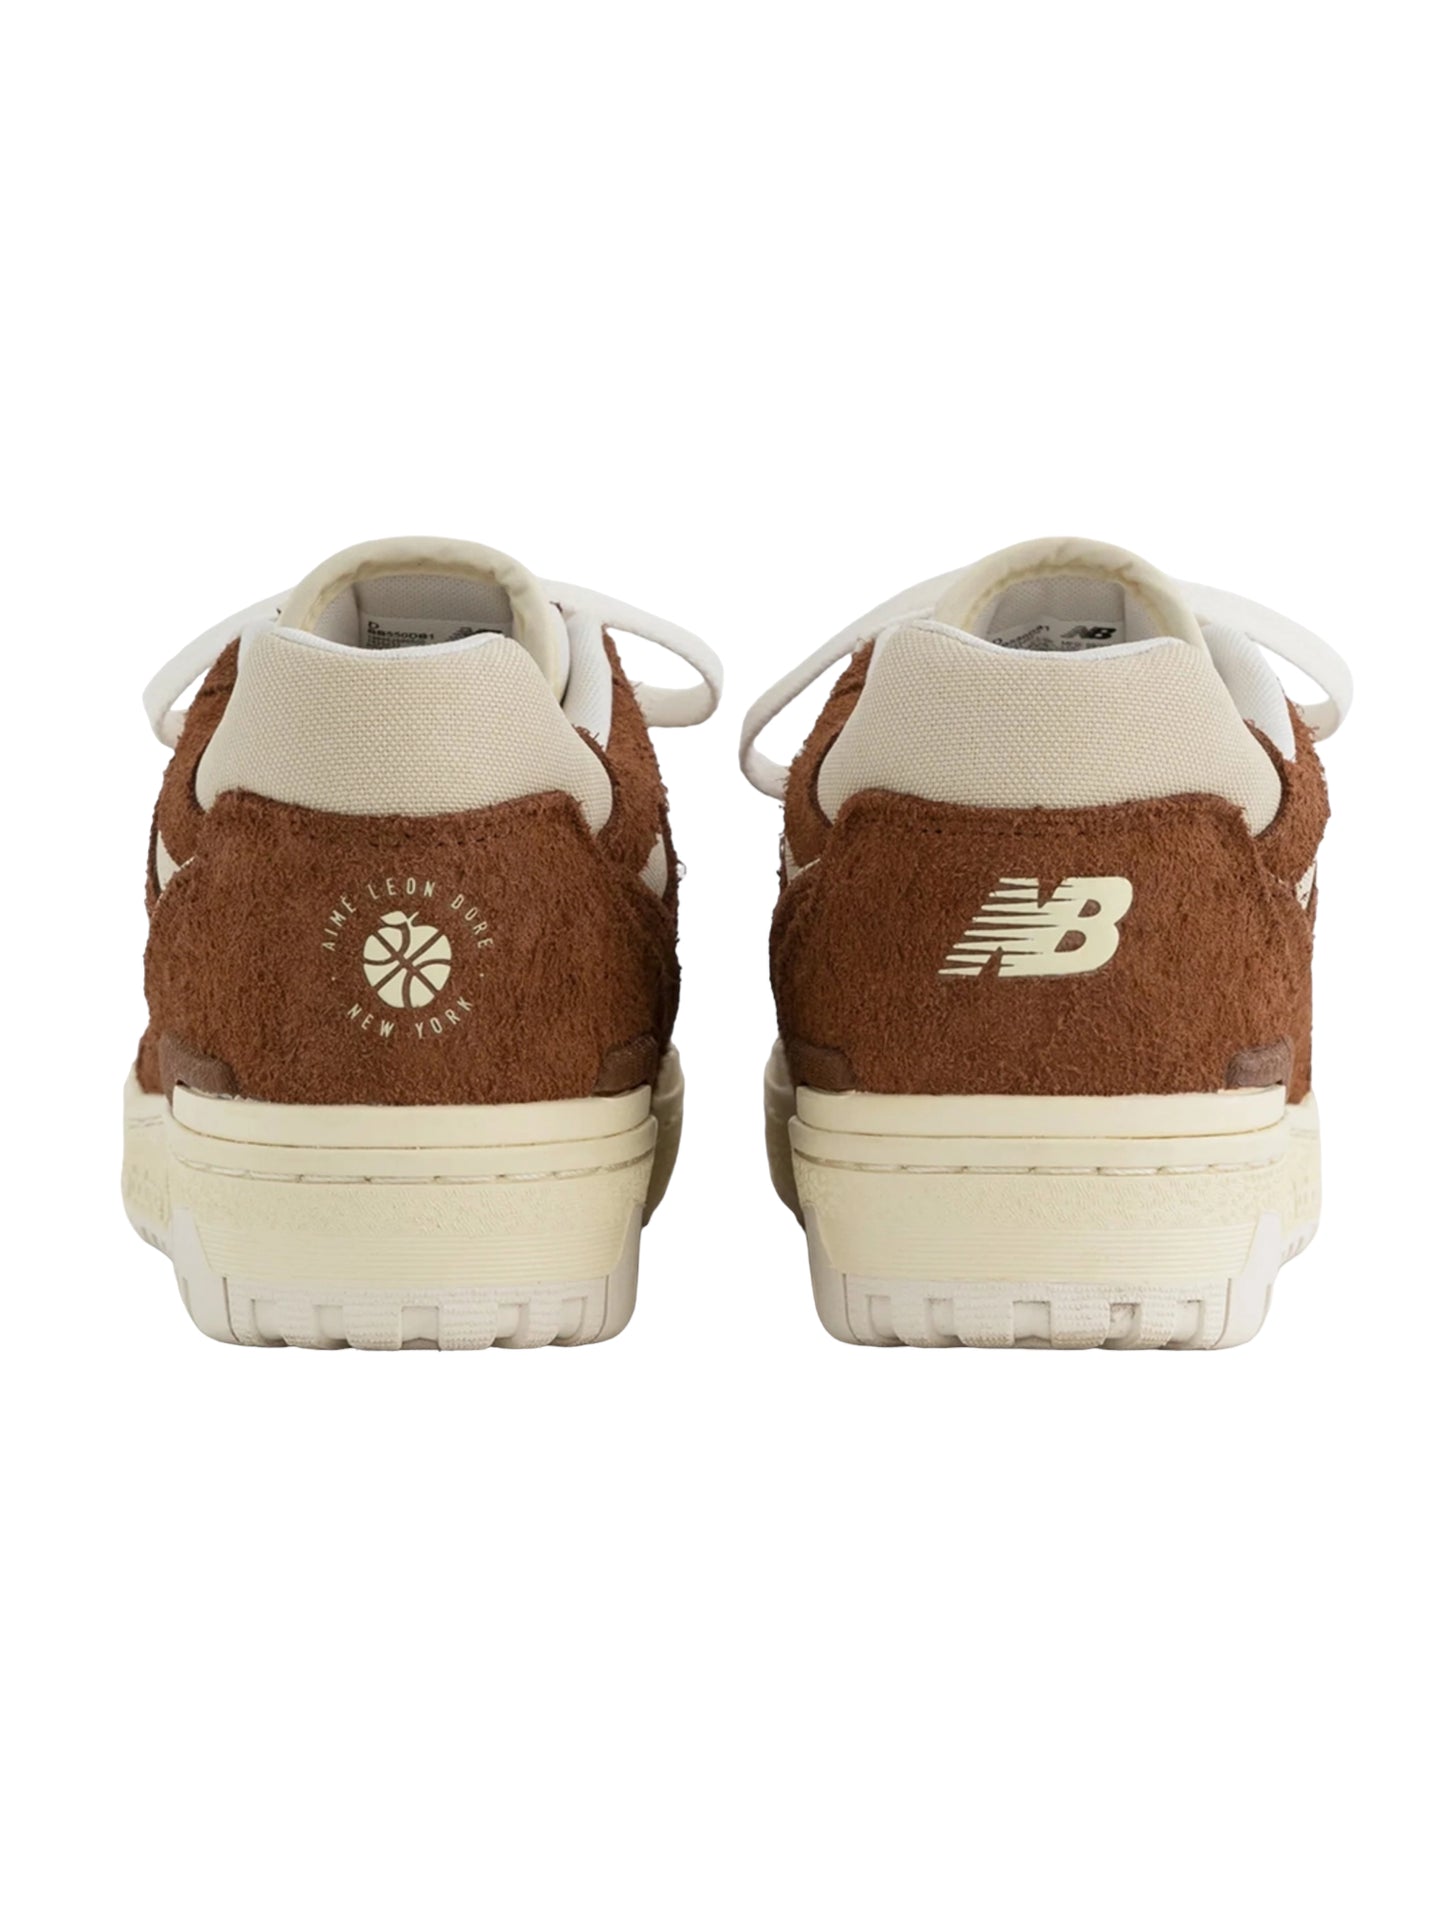 New Balance 550 Aime Leon Dore Brown Sneakers - Genuine Design Luxury Consignment for Men. New & Pre-Owned Clothing, Shoes, & Accessories. Calgary, Canada